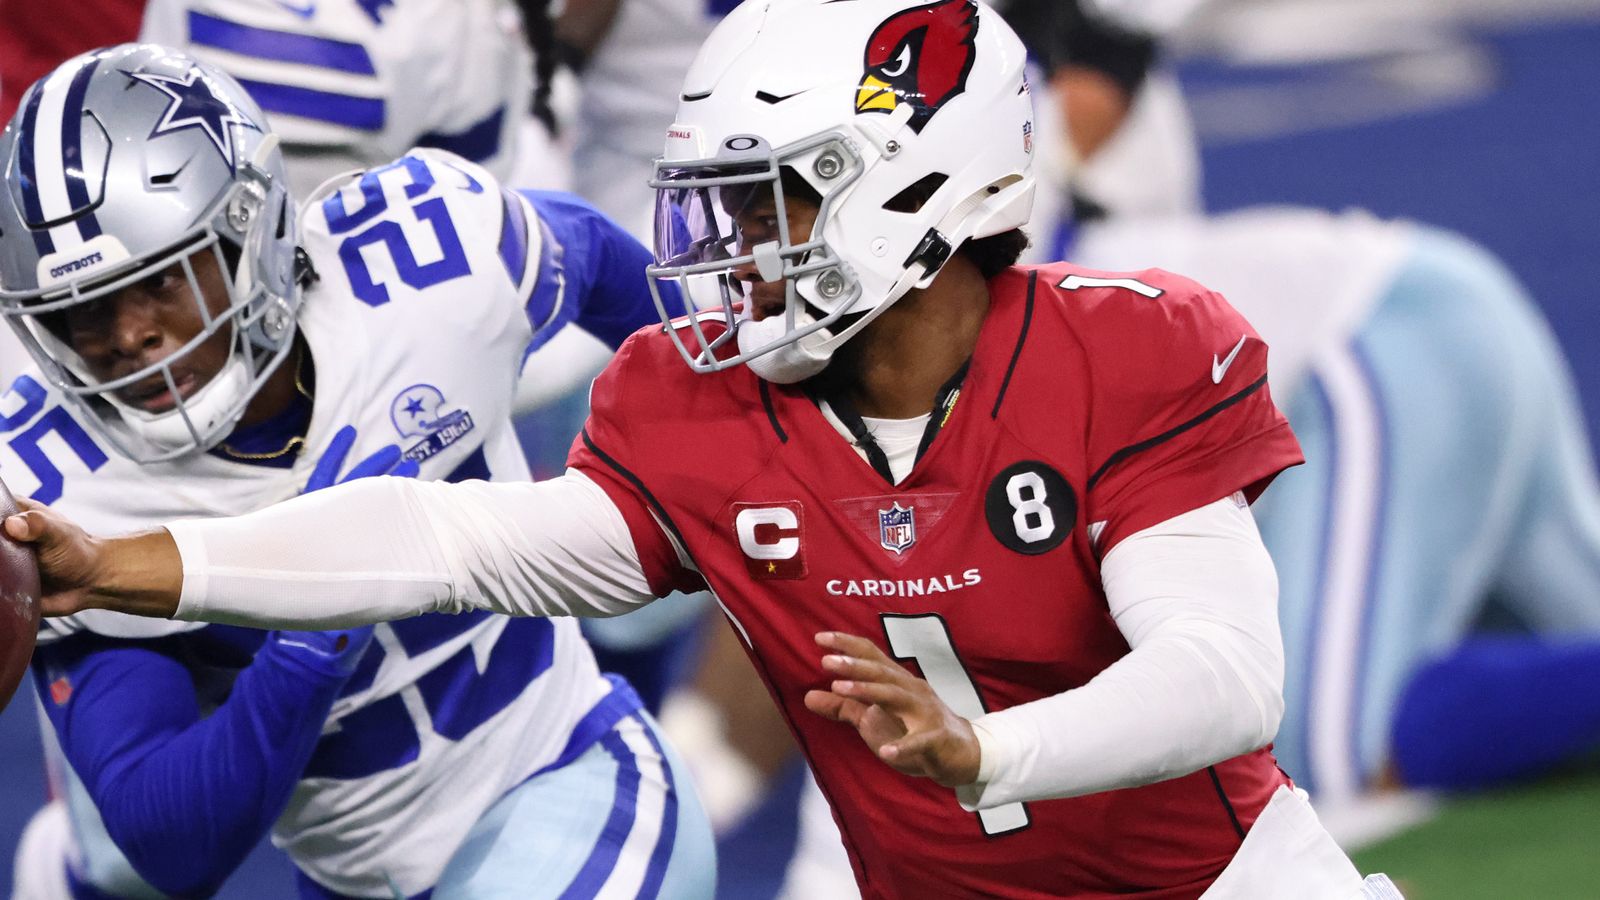 Kyler Murray's height comes into question again with rookie photo